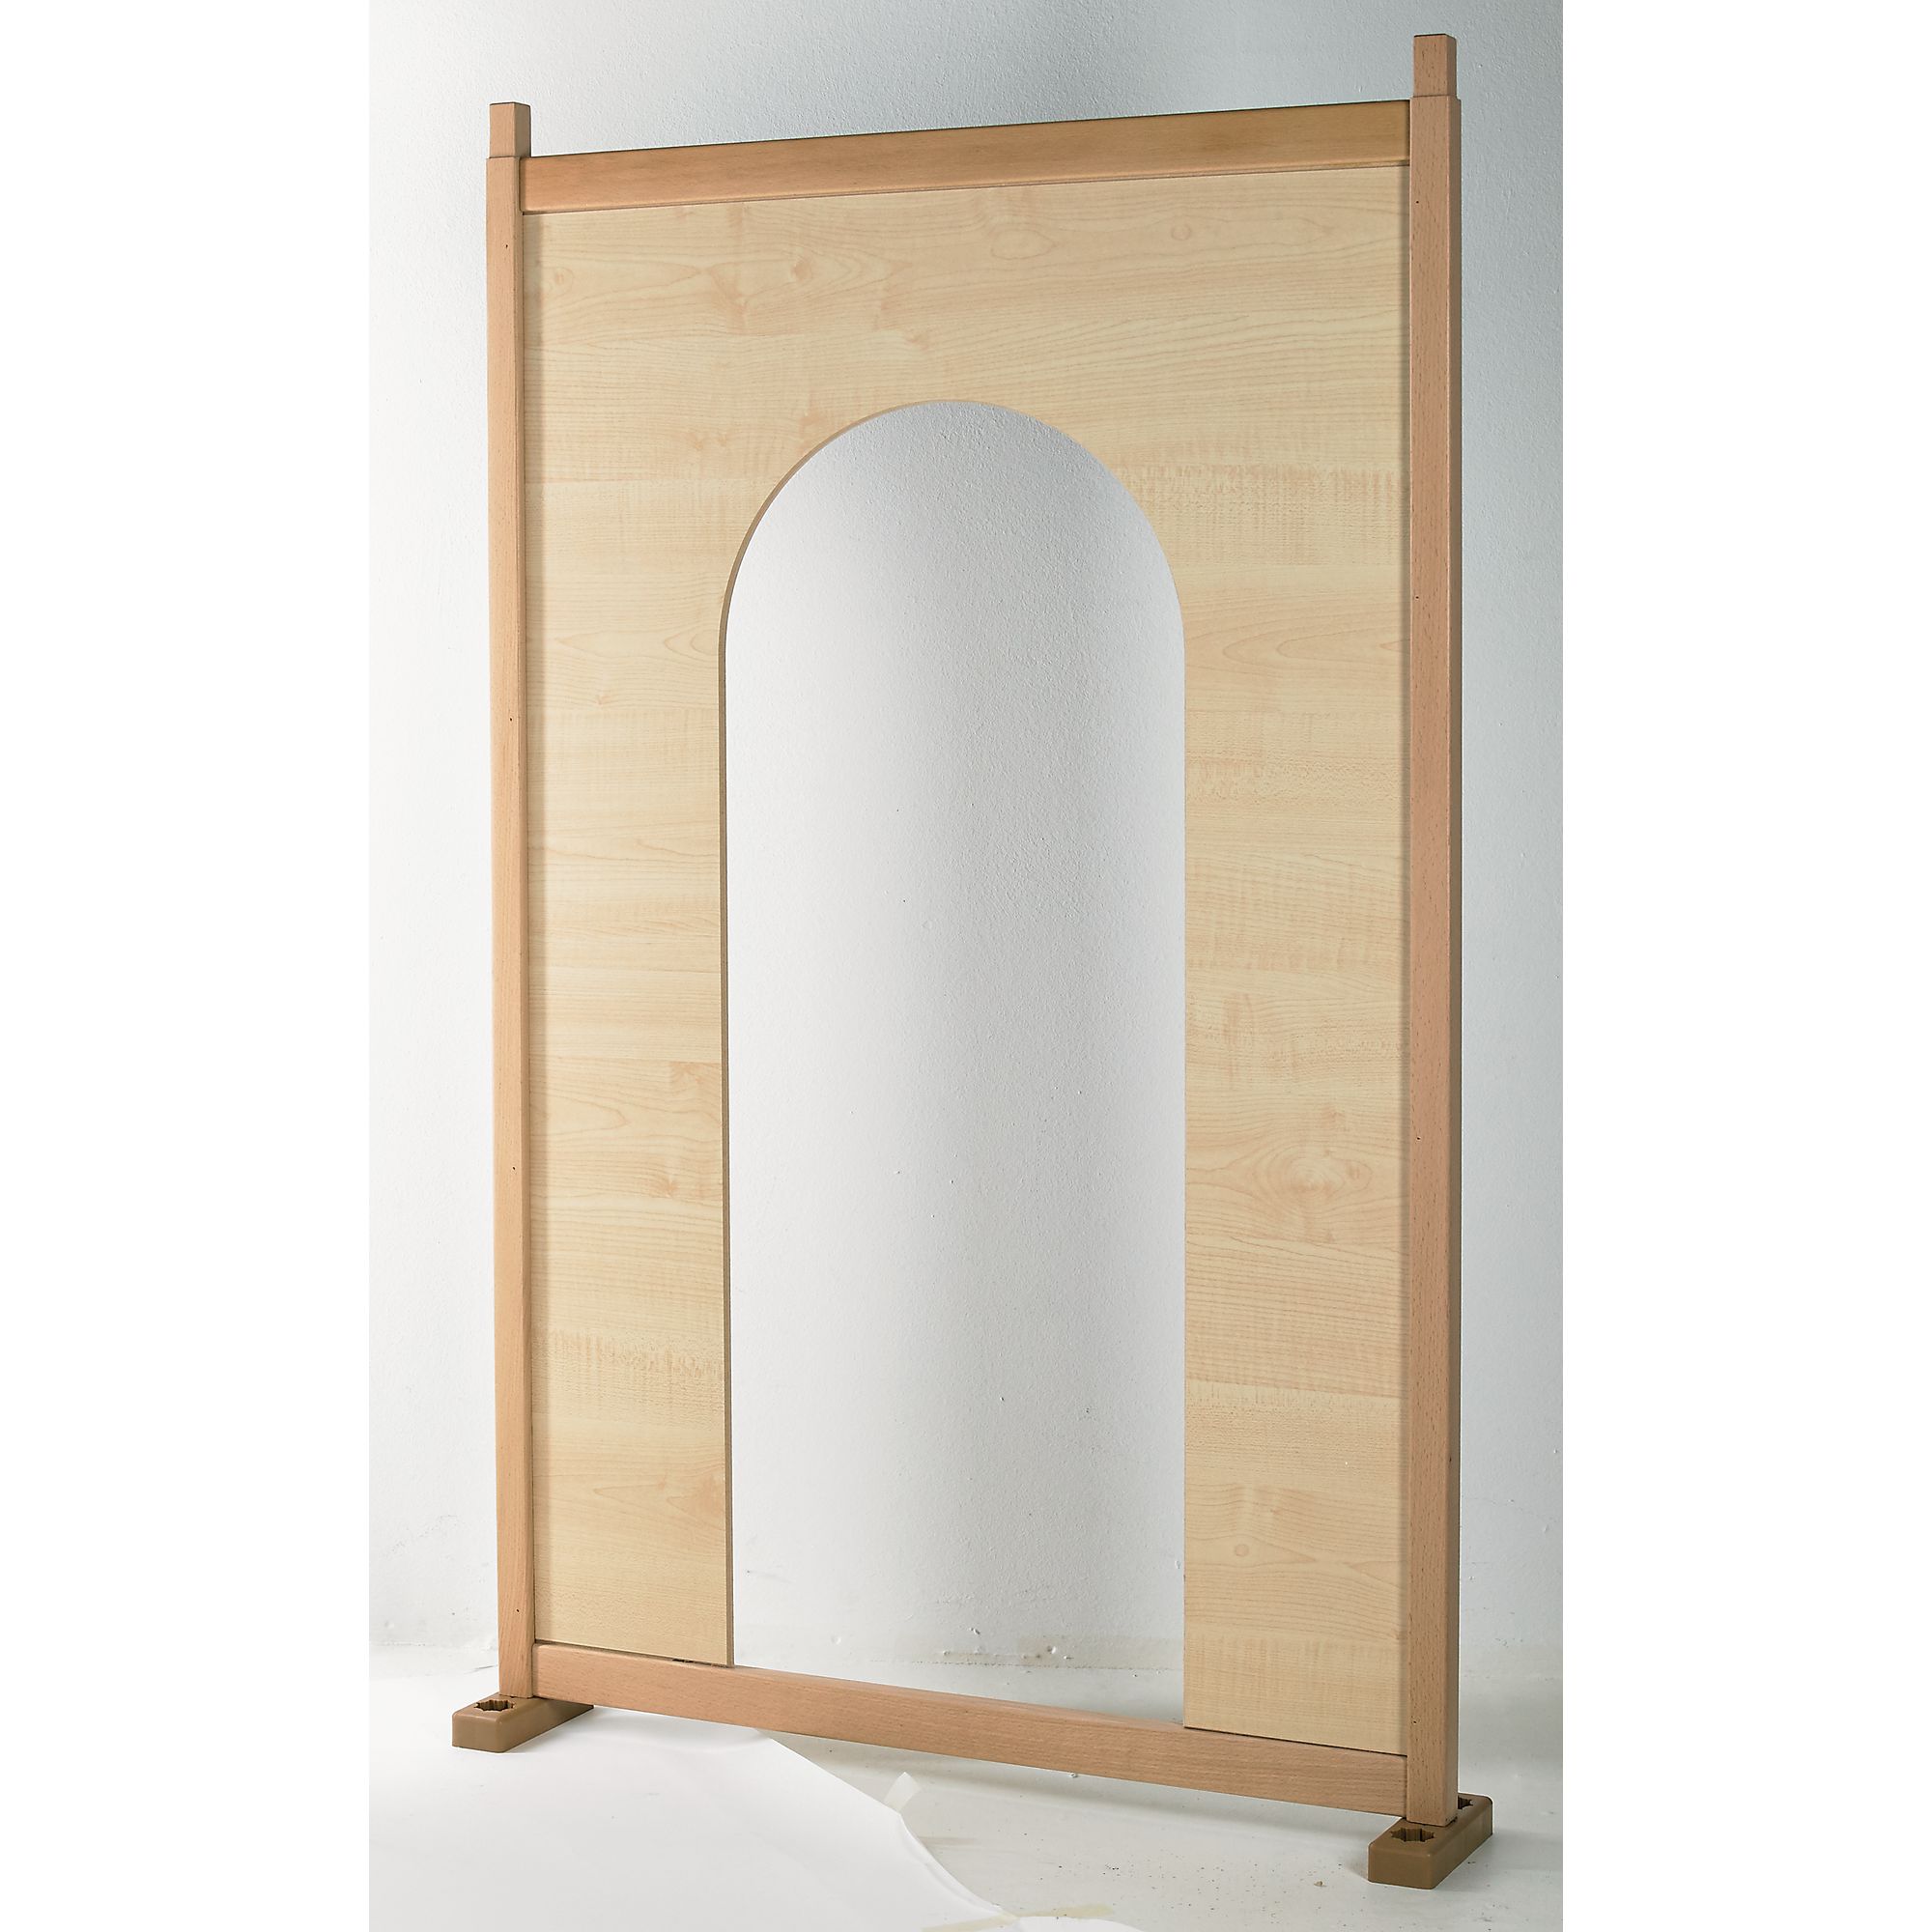 Maple Effect Play Panel Archway